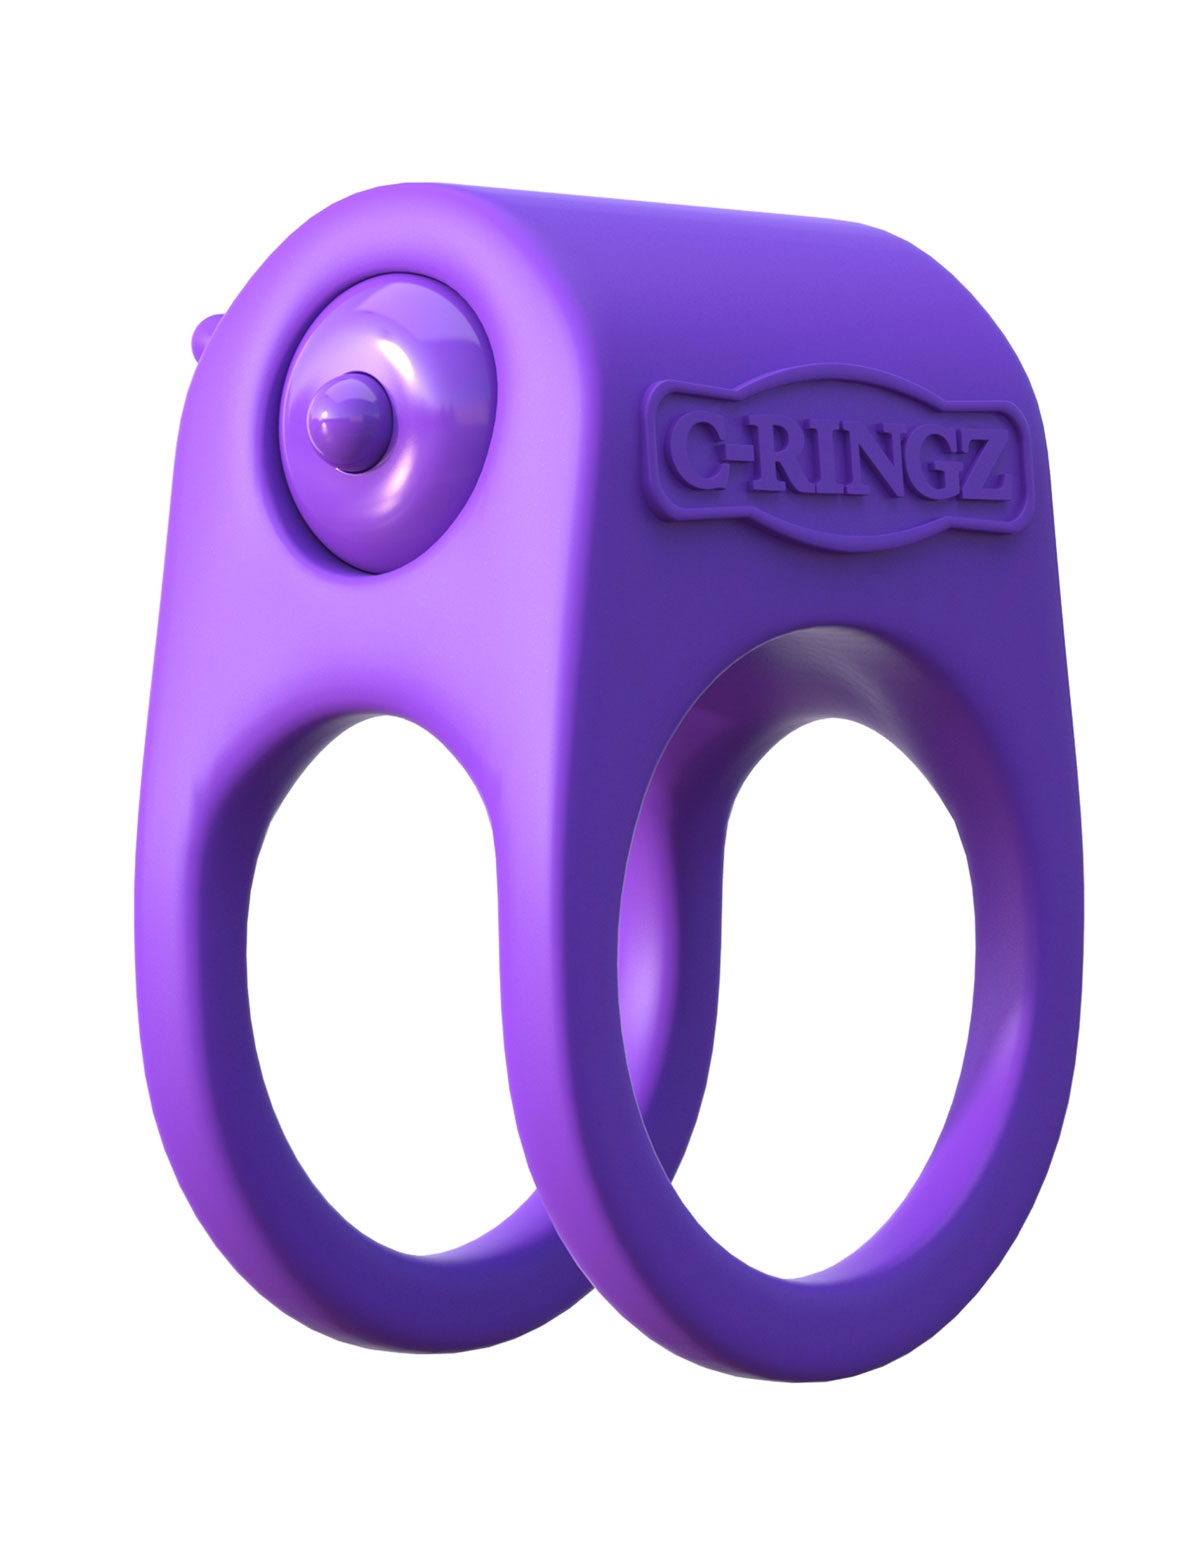 alternate image for C-Ringz Silicone Duo Cock Ring